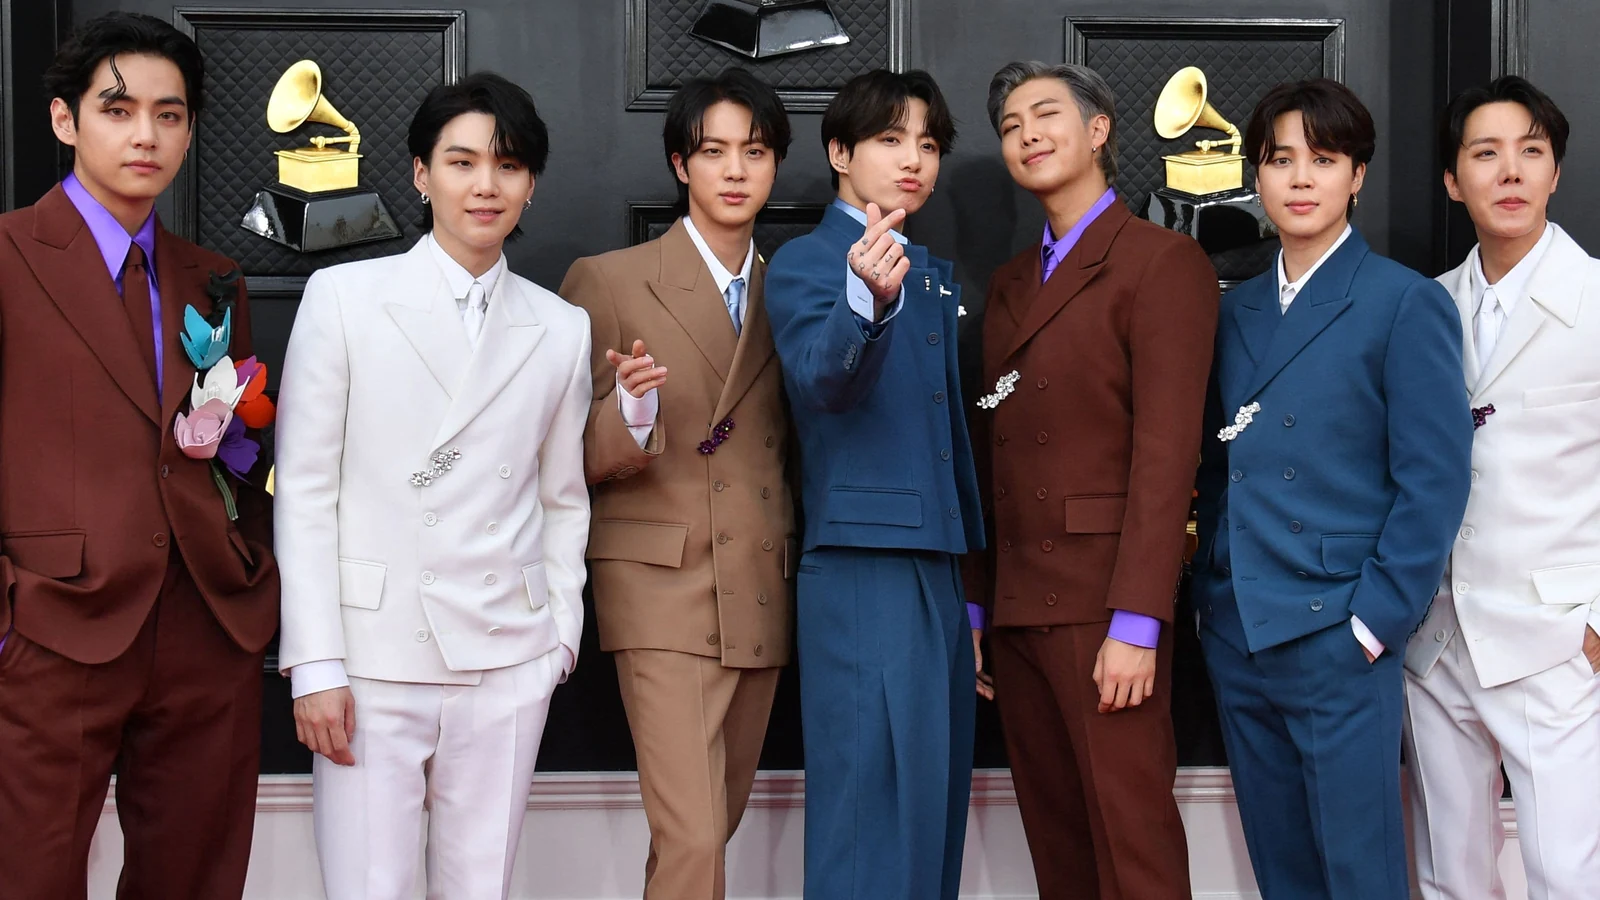 BTS at Grammy Awards 2022: RM, Jin, Suga, J-Hope, Jimin, V, Jungkook serve DYNAMITE looks in chic Louis Vuitton suits